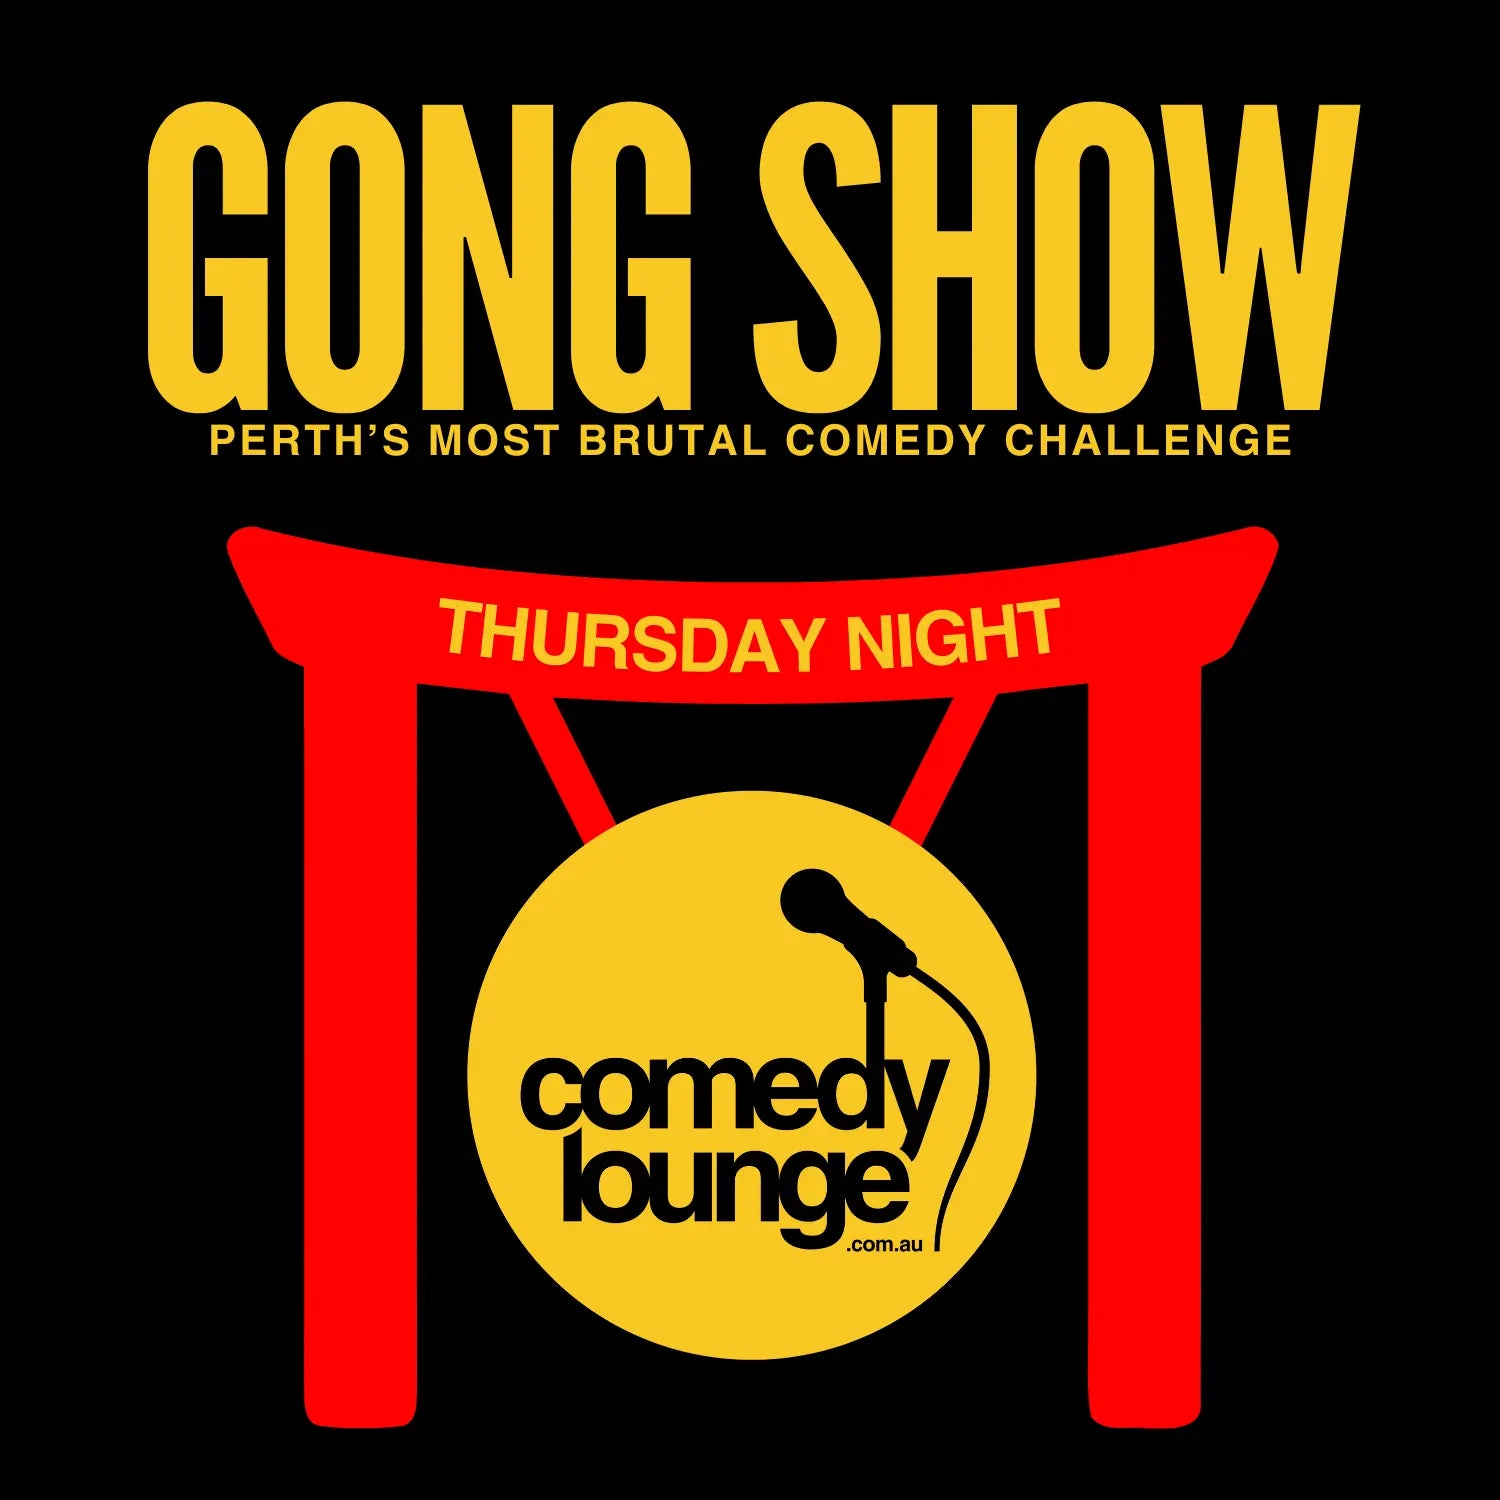 thursday night live standup comedy show competition. The Gong Show event poster